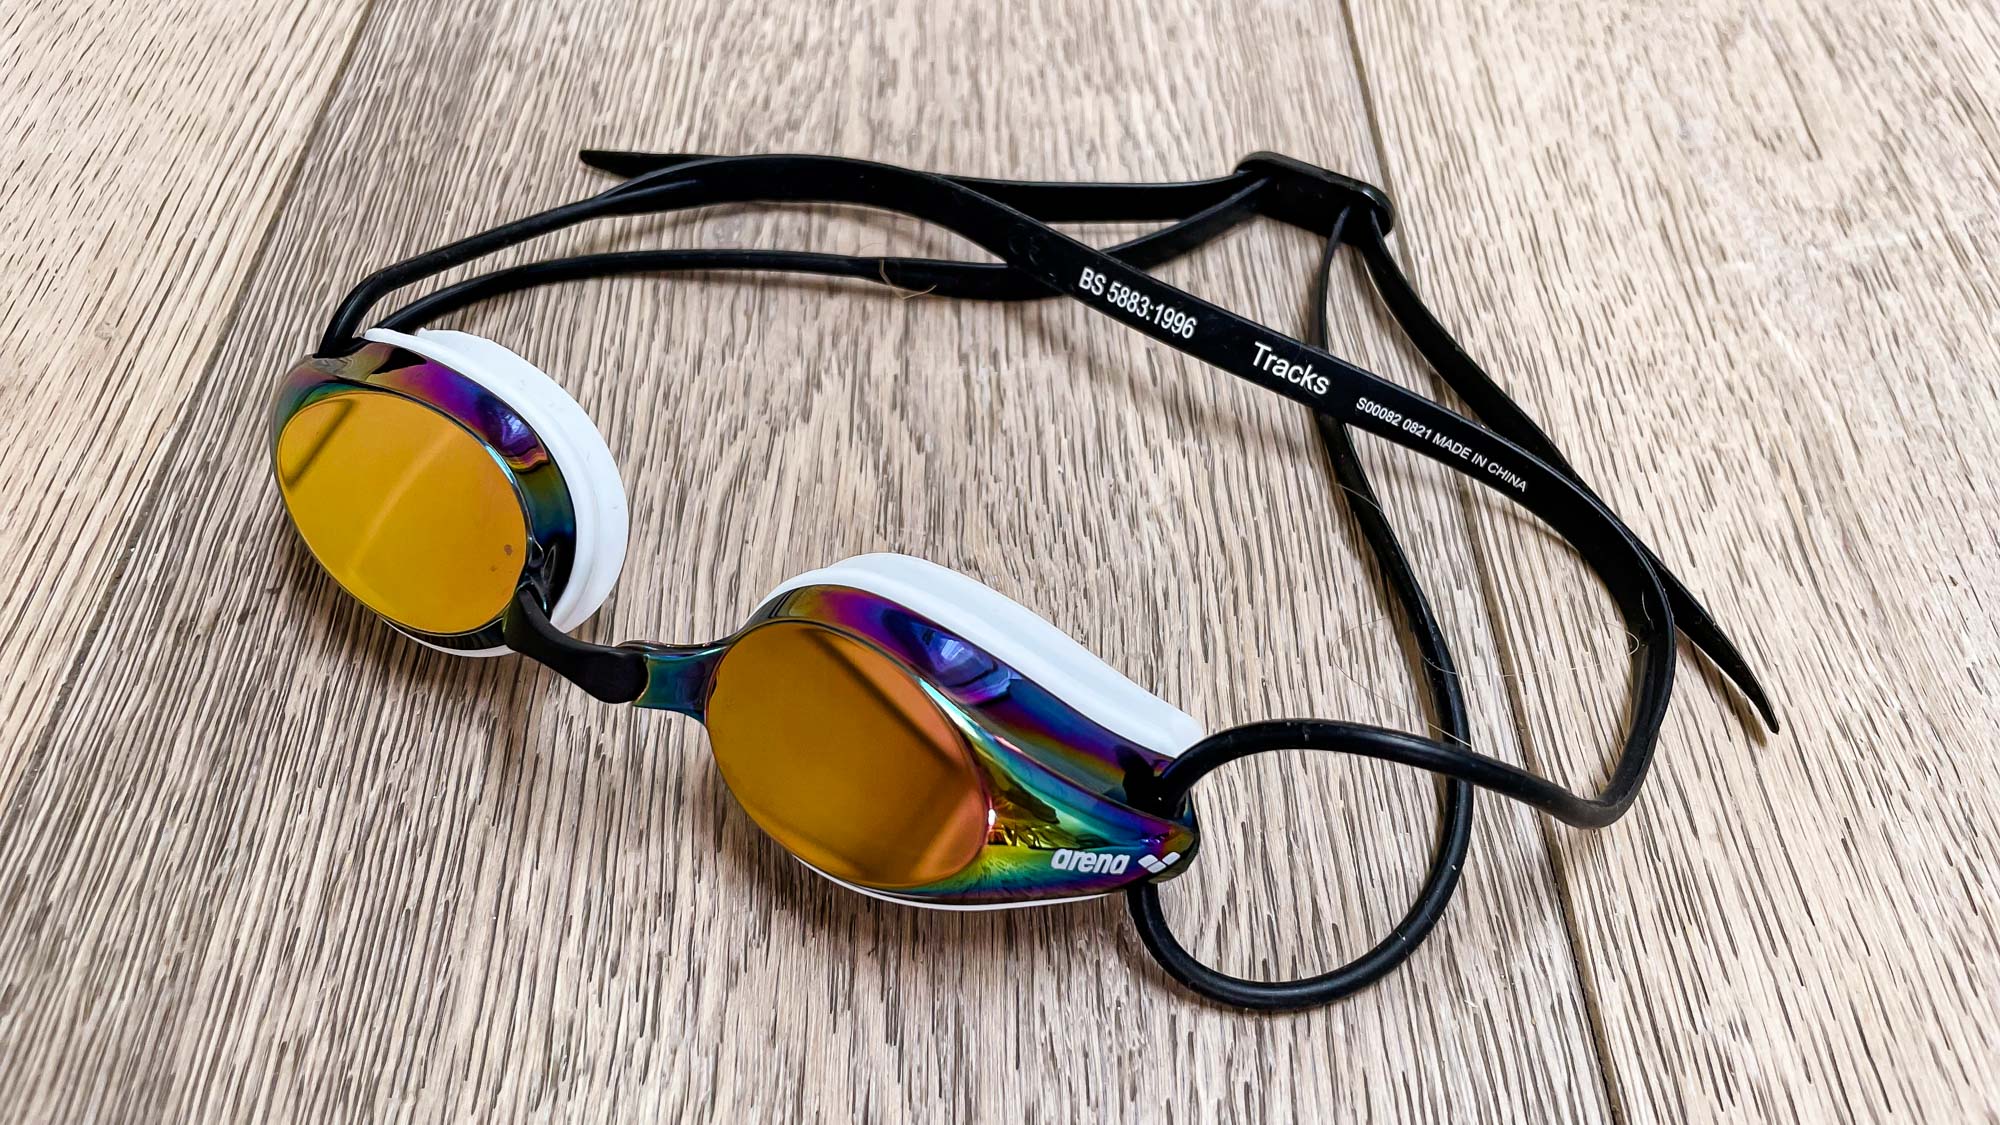 Best swimming goggles: Arena Tracks Mirror Racing Goggles